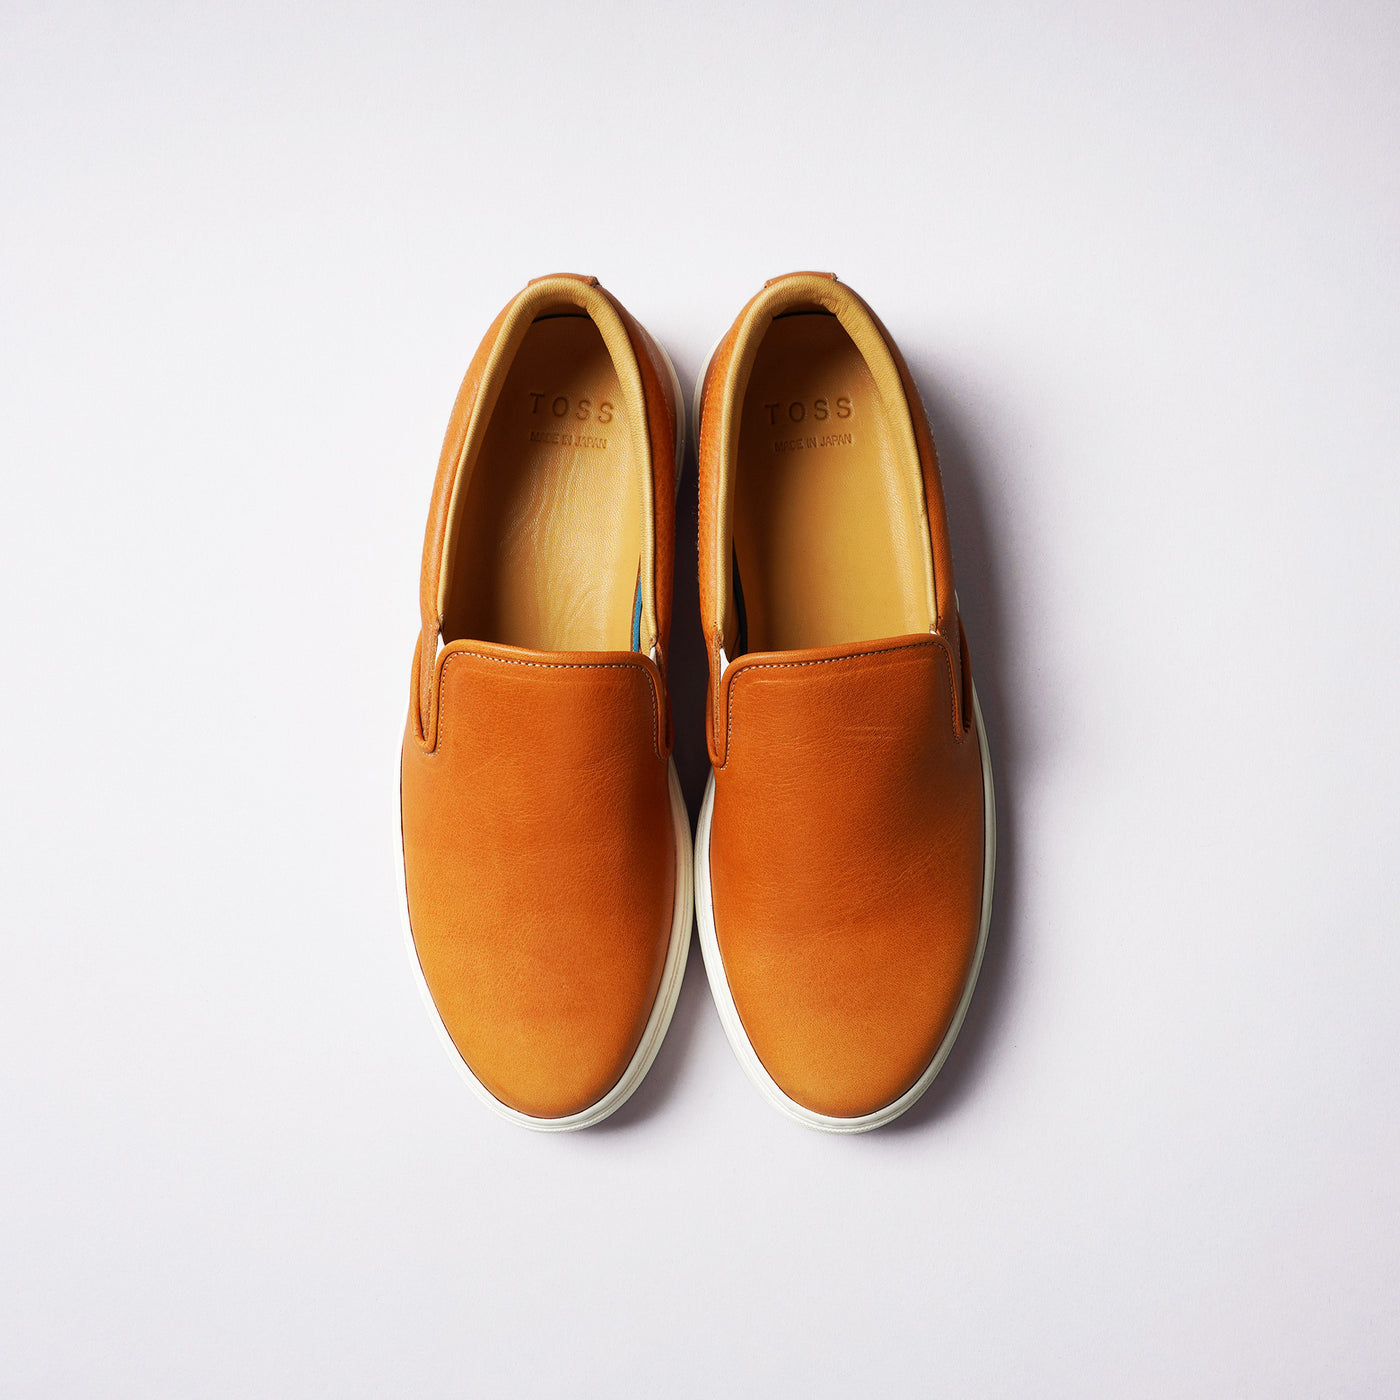 <TOSS> Lance Lance slip-on leather sneakers, Tanned Tochigi leather / brown